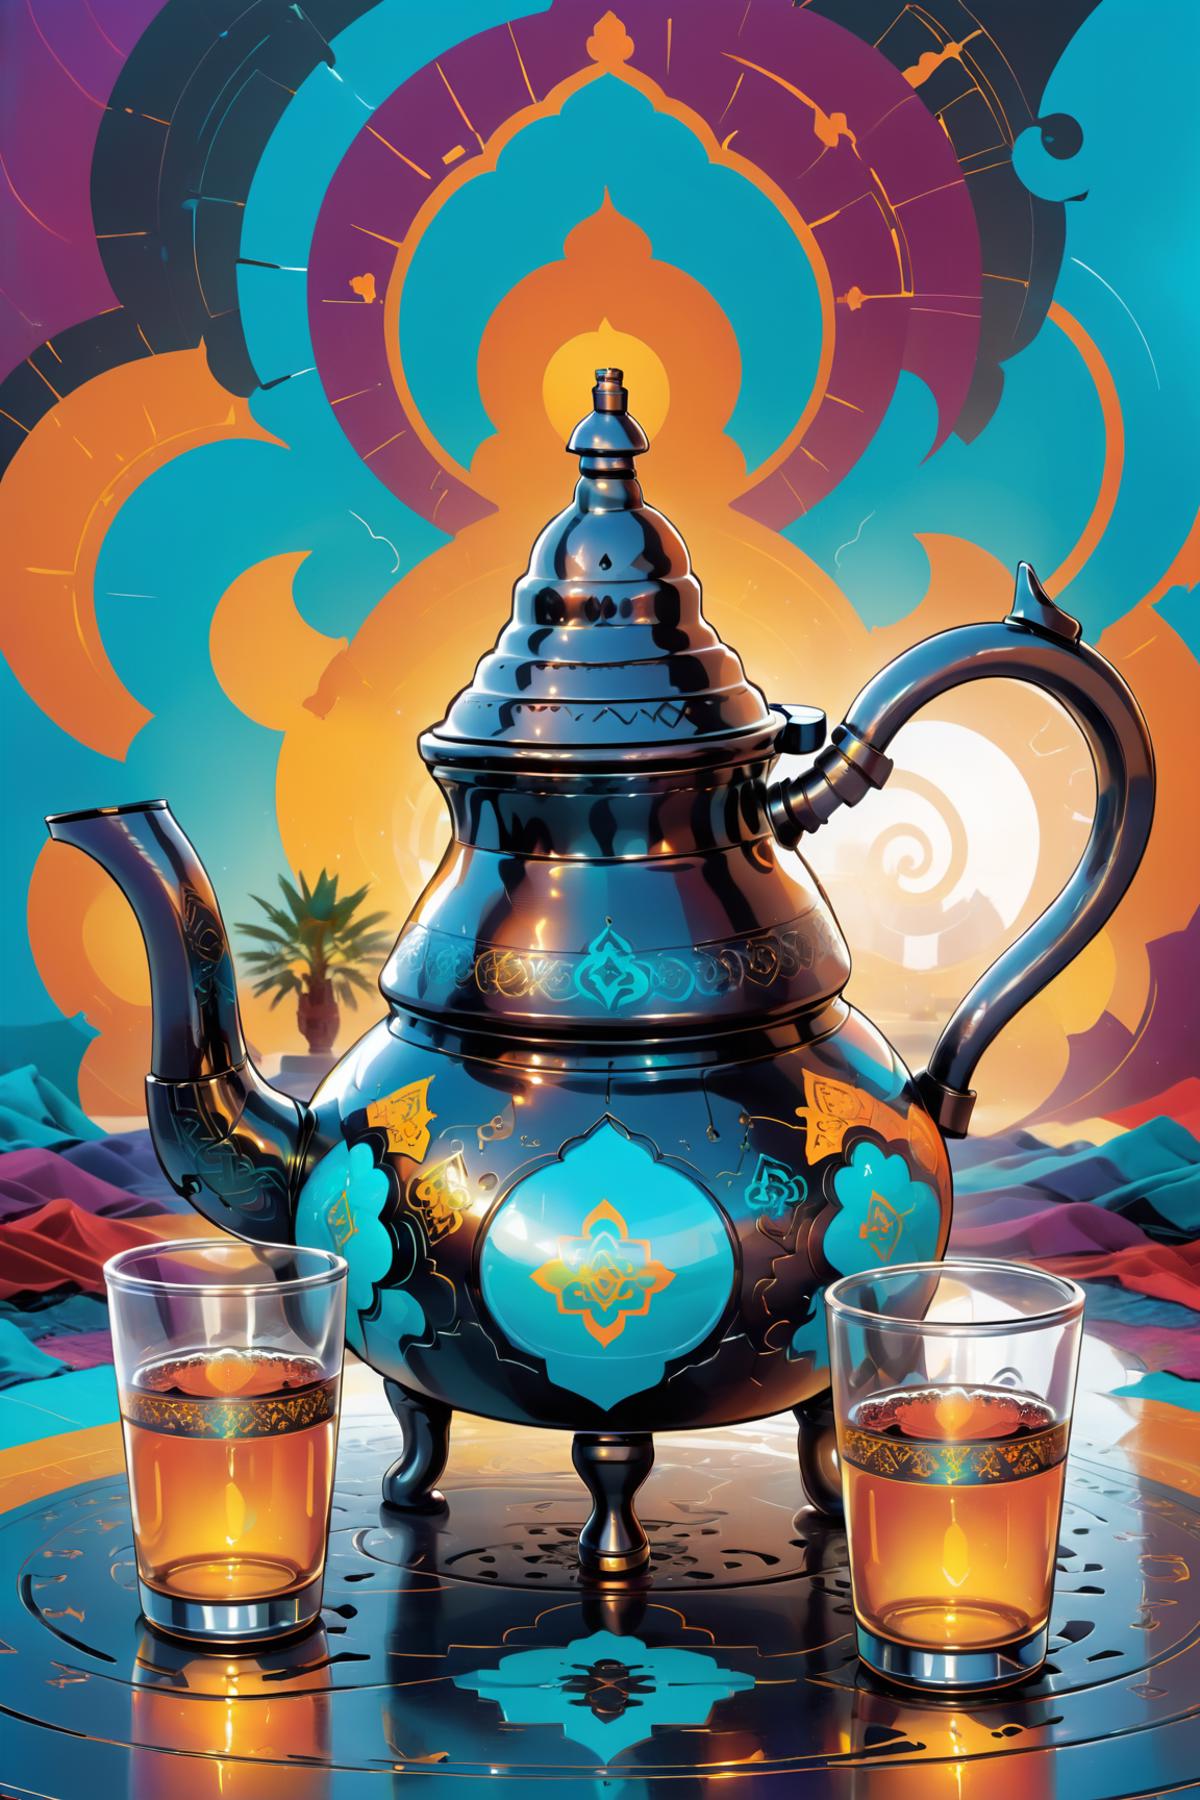 Atay (Moroccan mint-tea) image by AdrarDependant